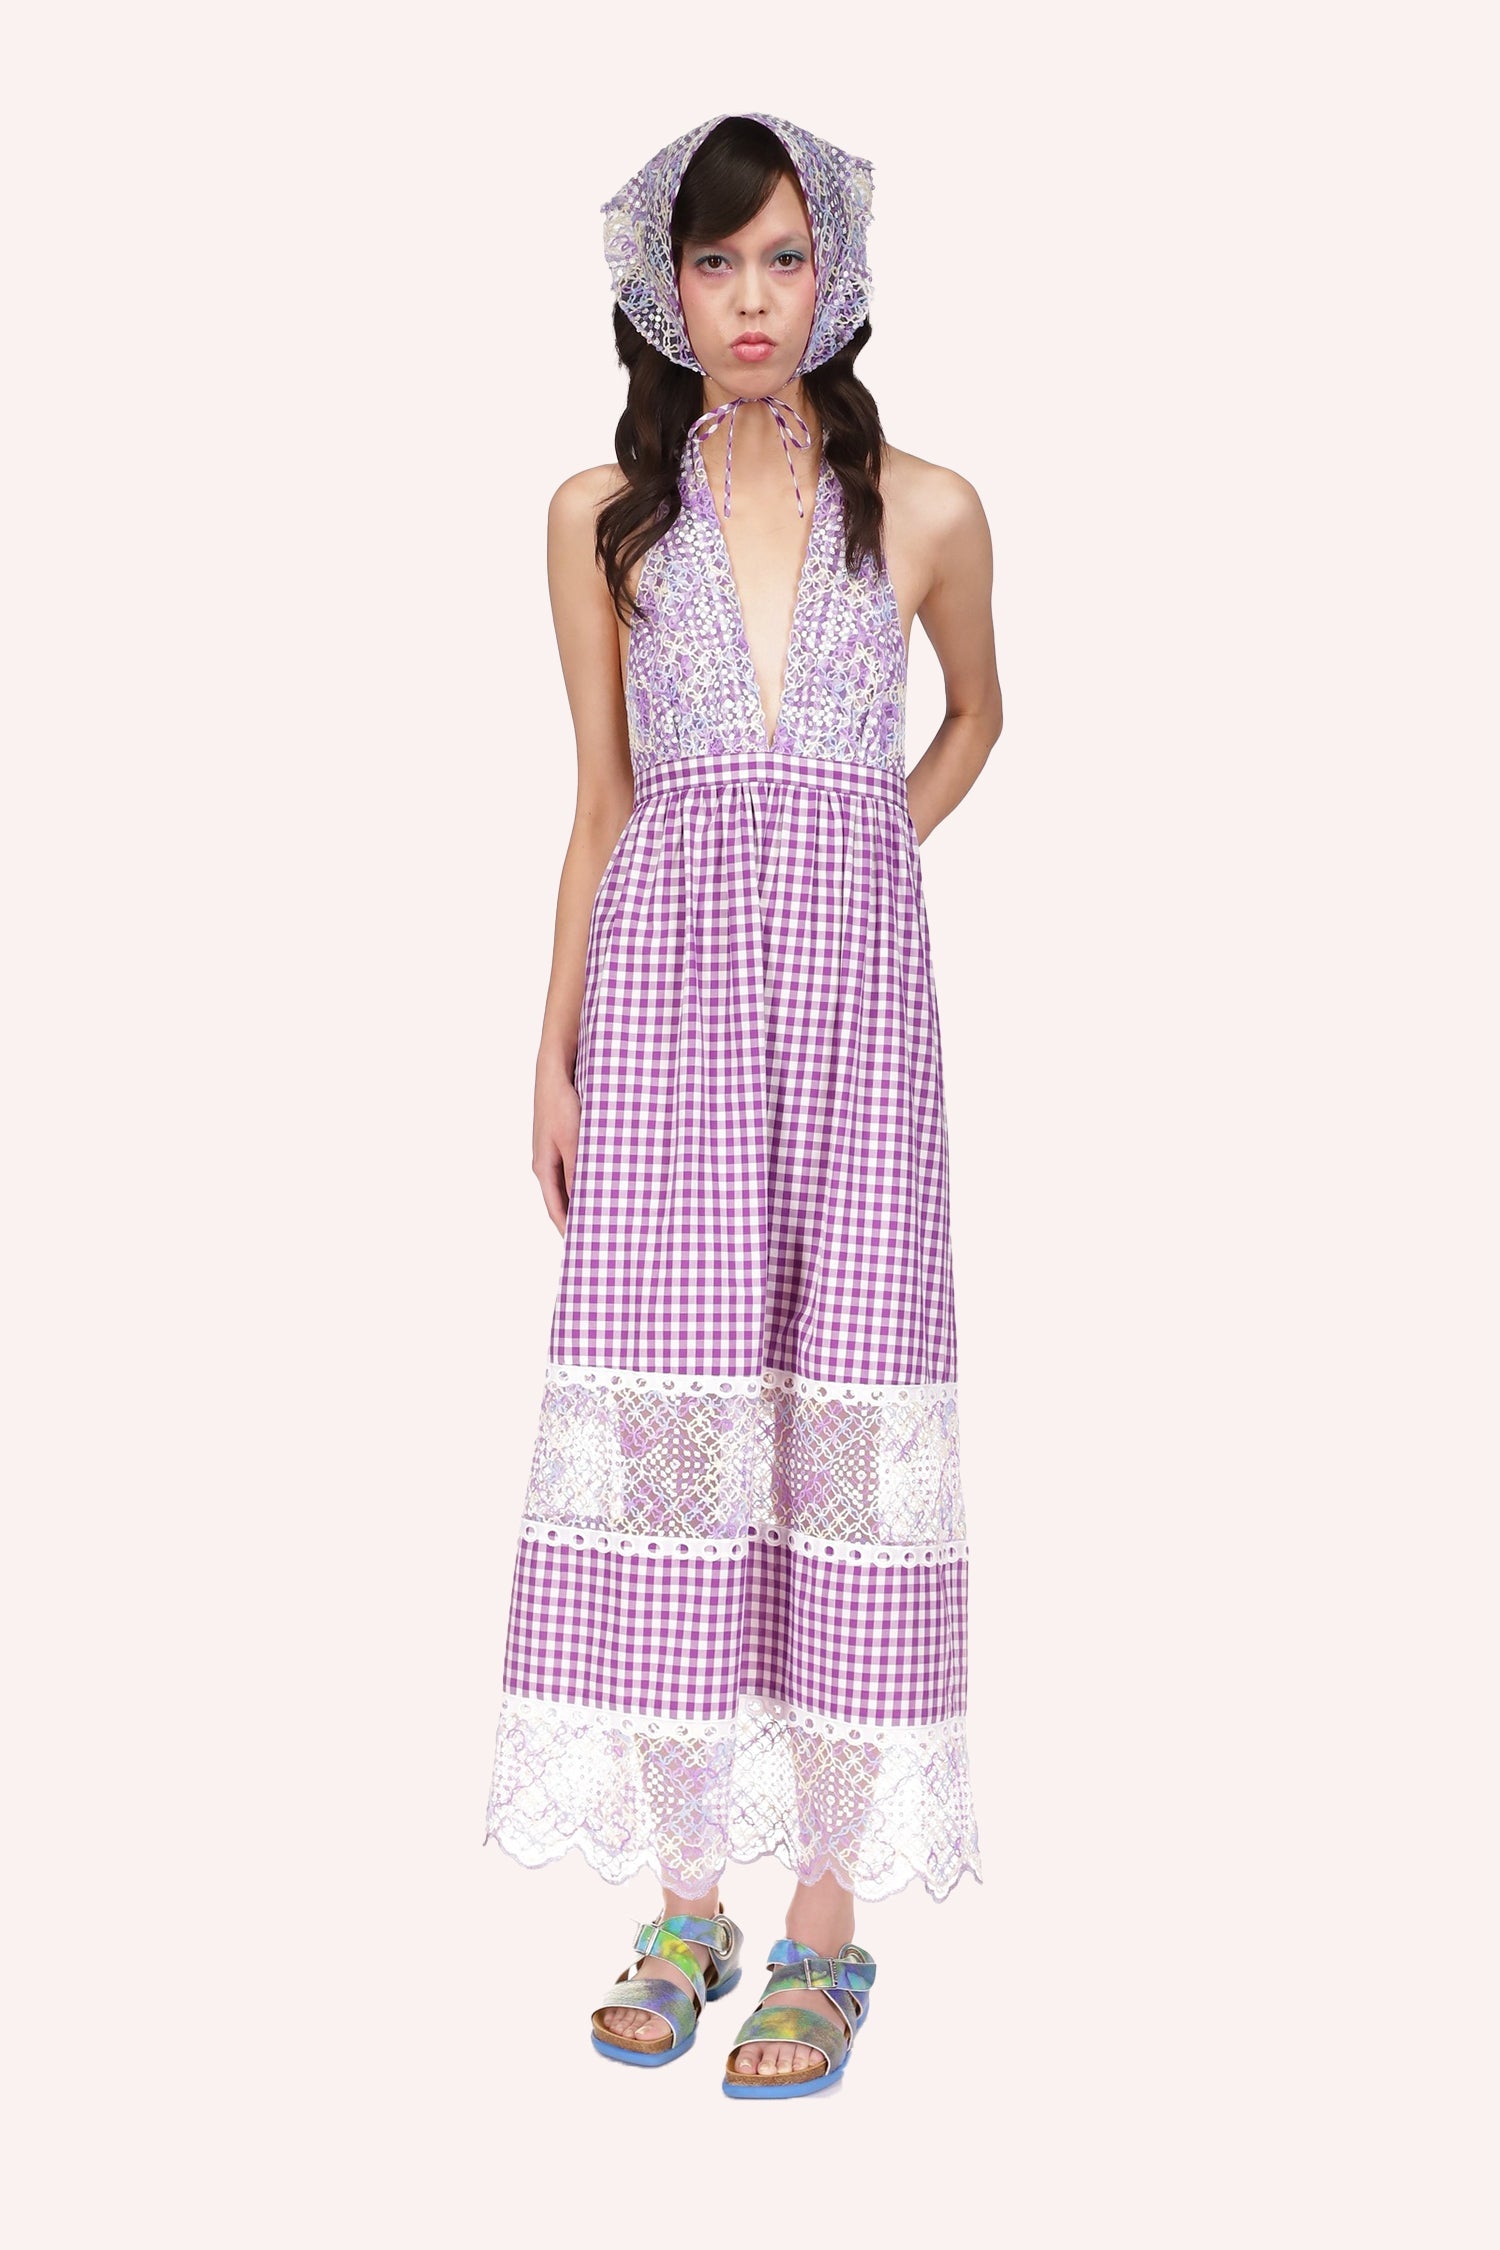 Gingham Halter Dress white and purple, sleeveless, ankles long, large lace at knees level & bottom.